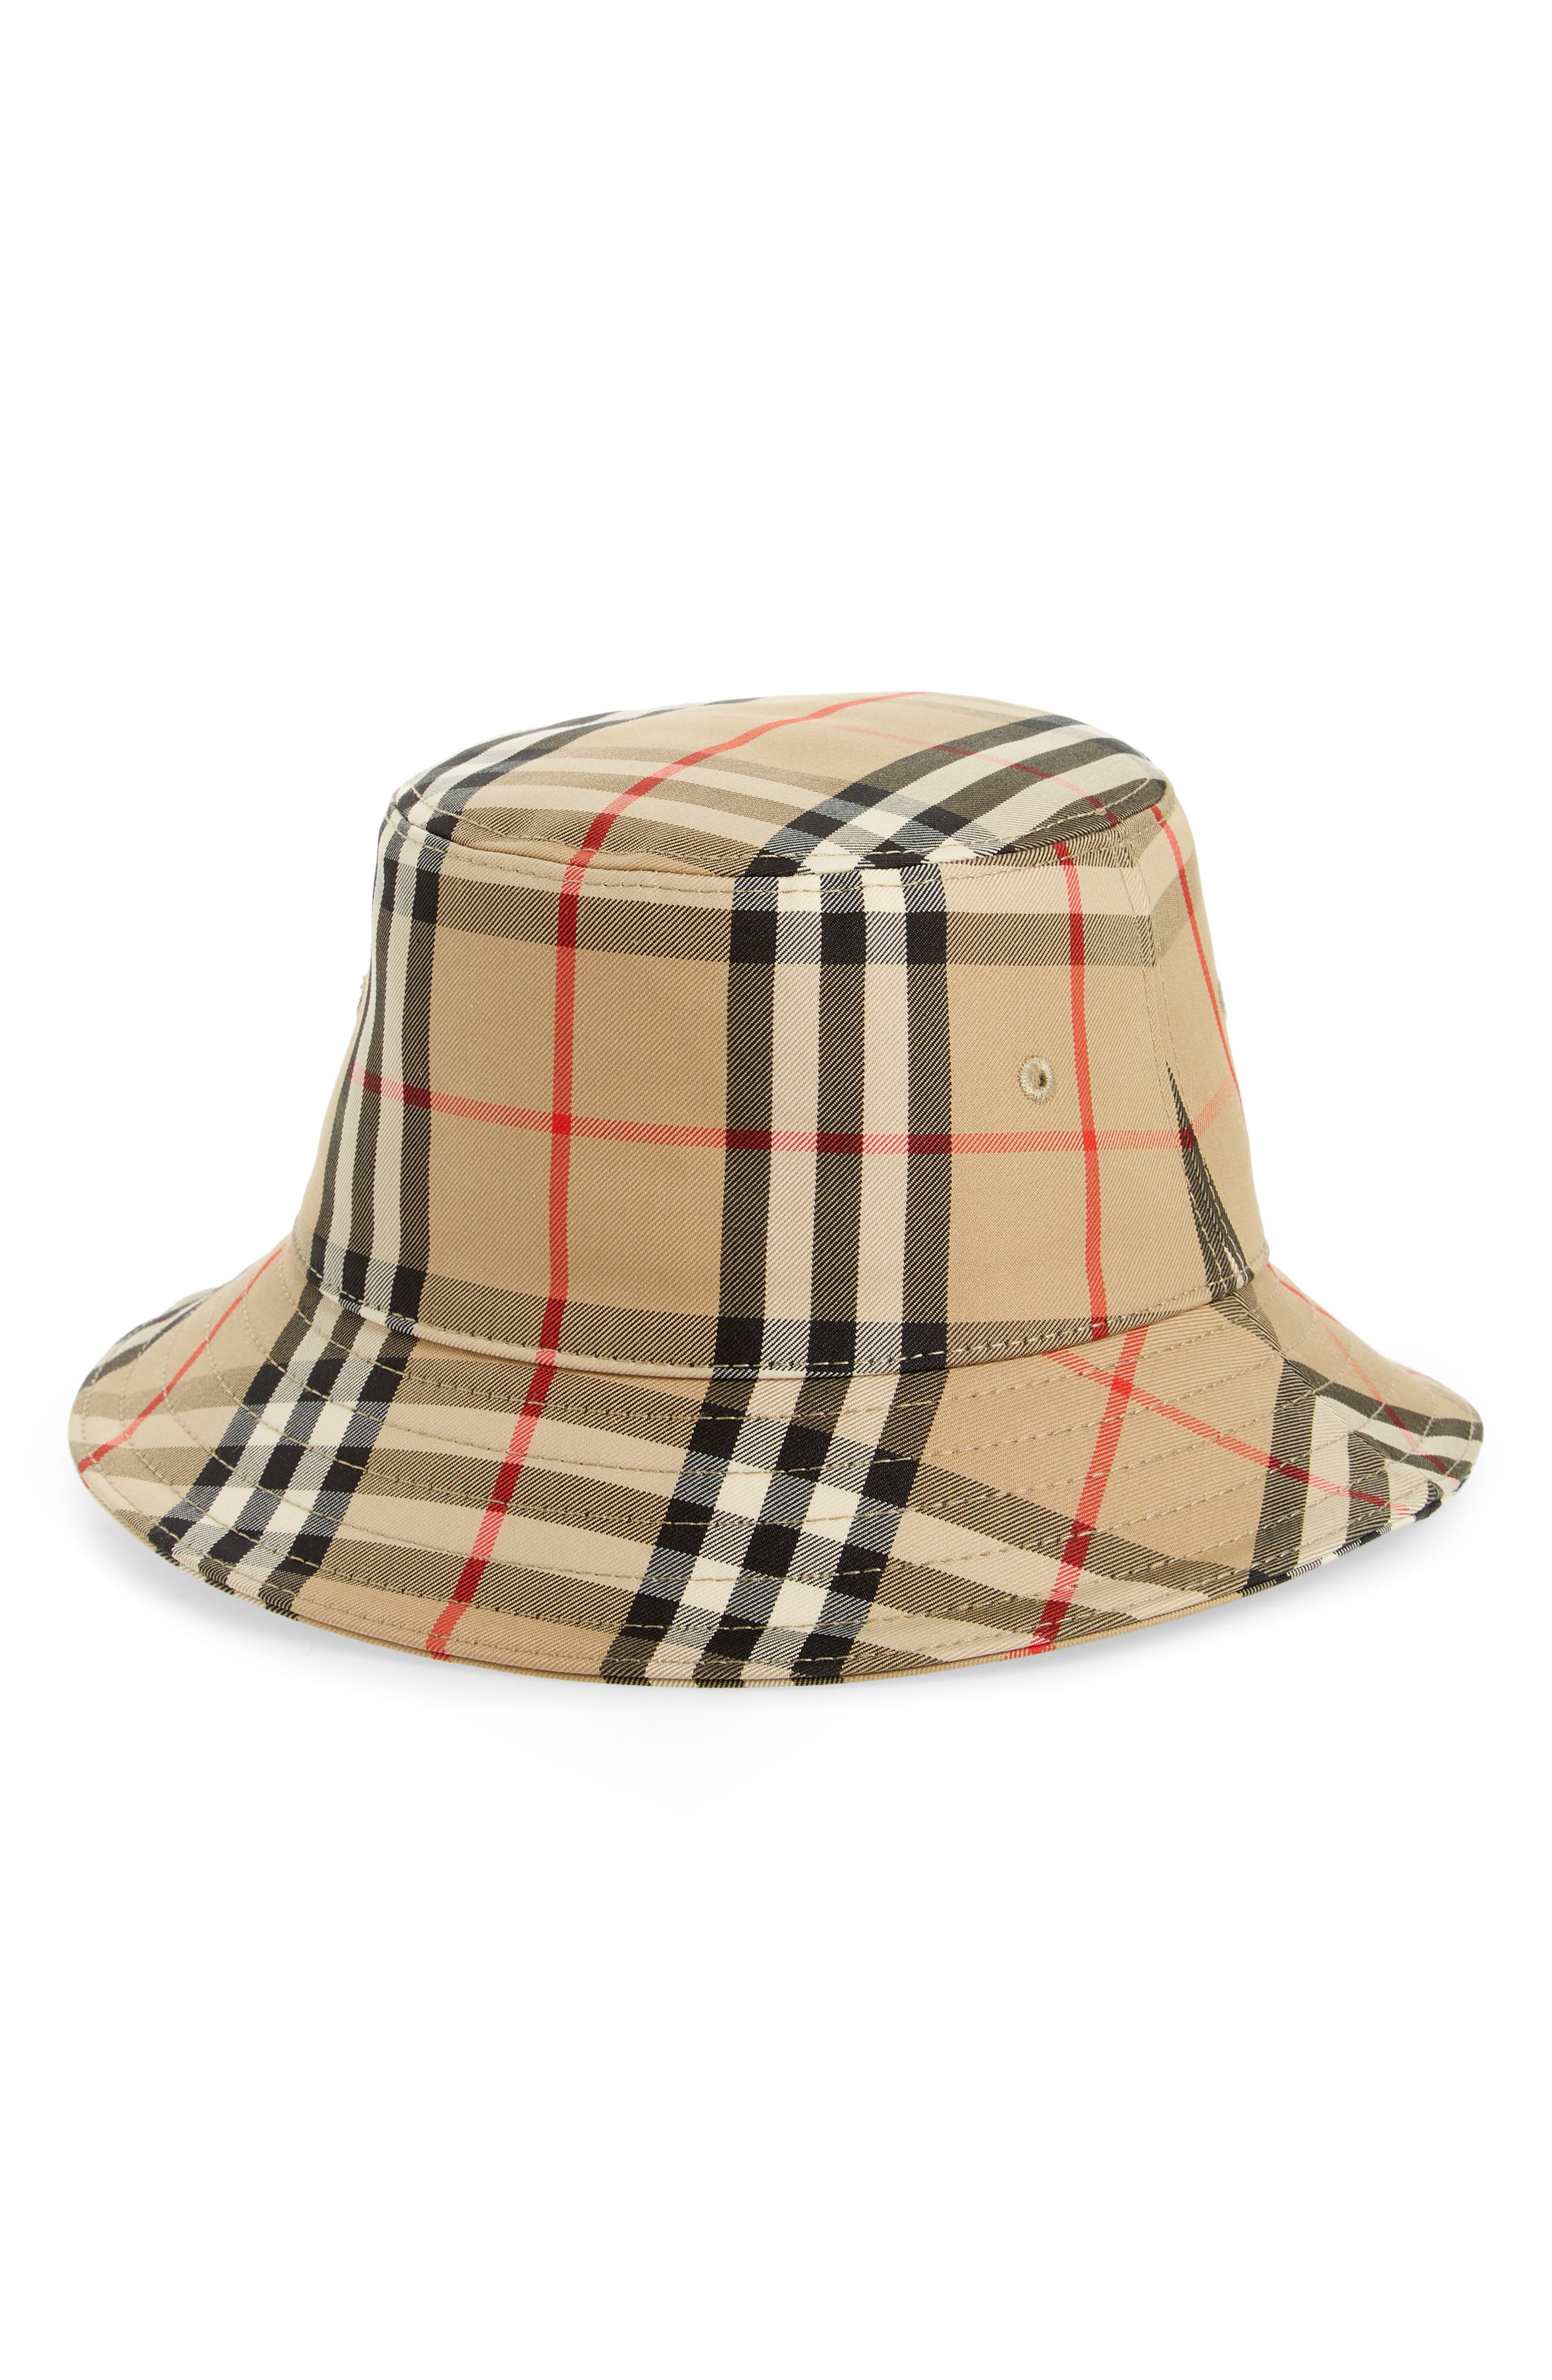 Burberry Kids' Gabriel Check Bucket Hat in Archive Beige at Nordstrom, Size 2-3 Y Us